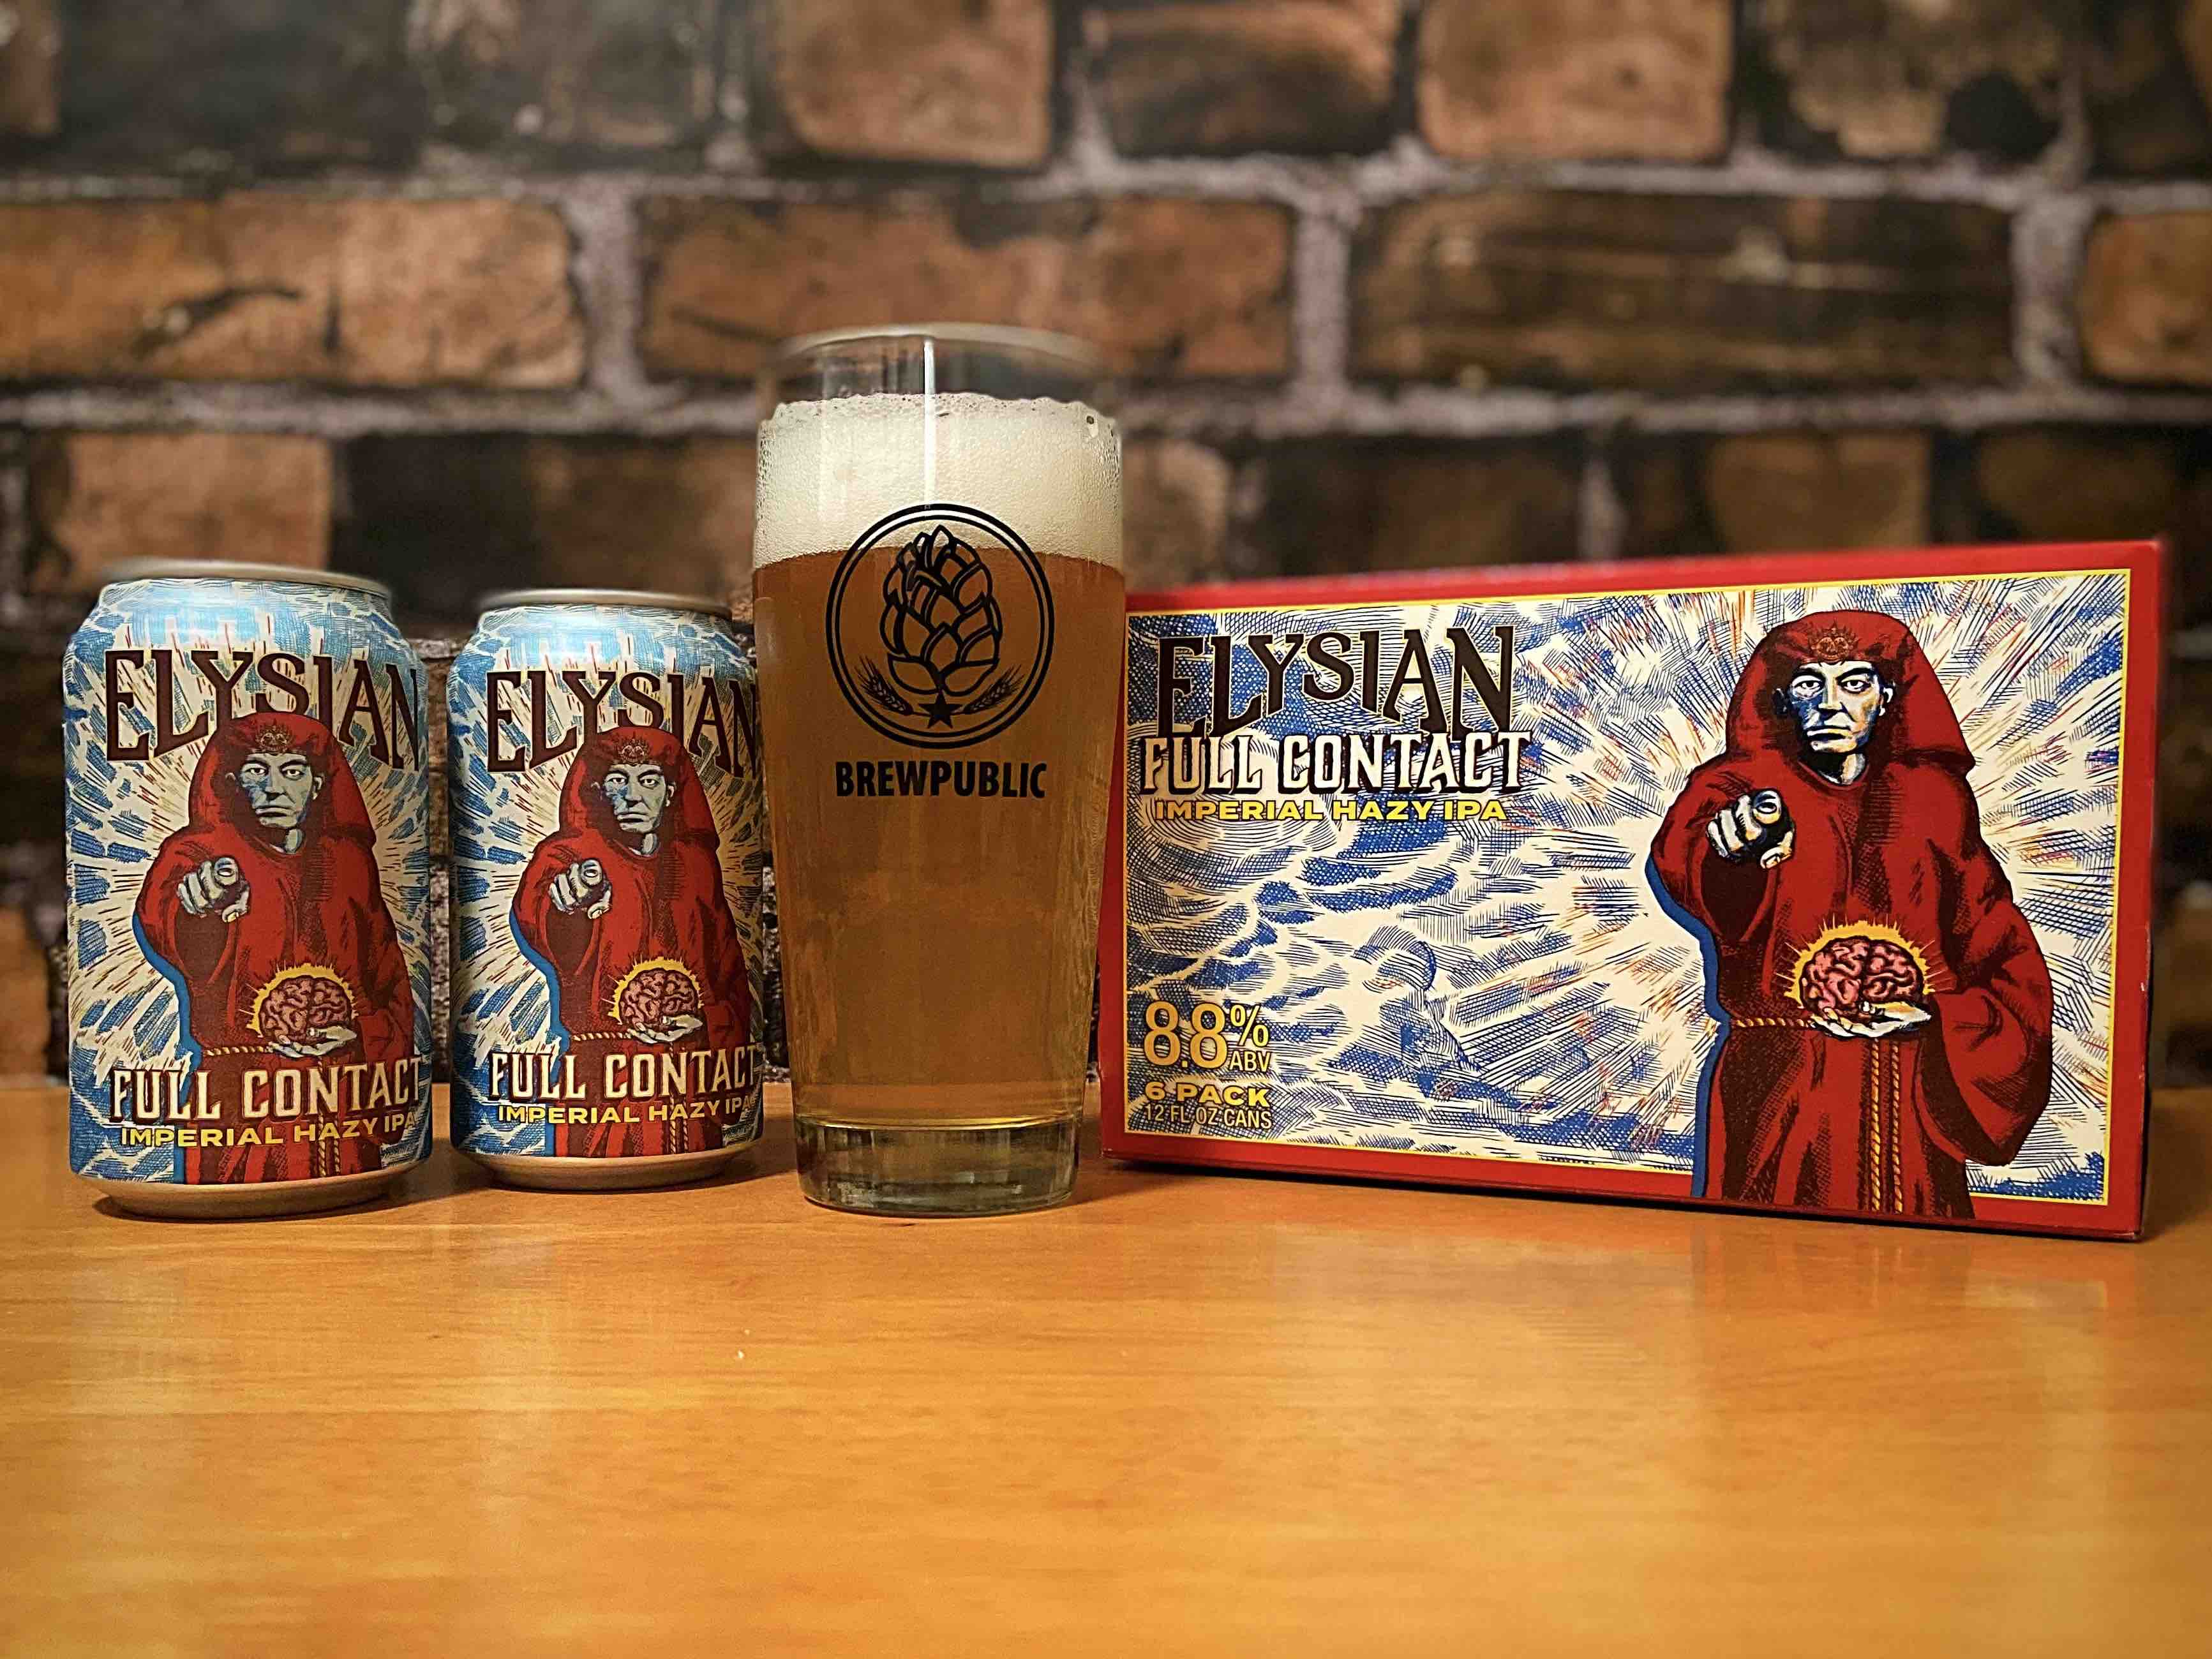 Elysian Brewing expands its Contact lineup with the new Full Contact Imperial Hazy IPA